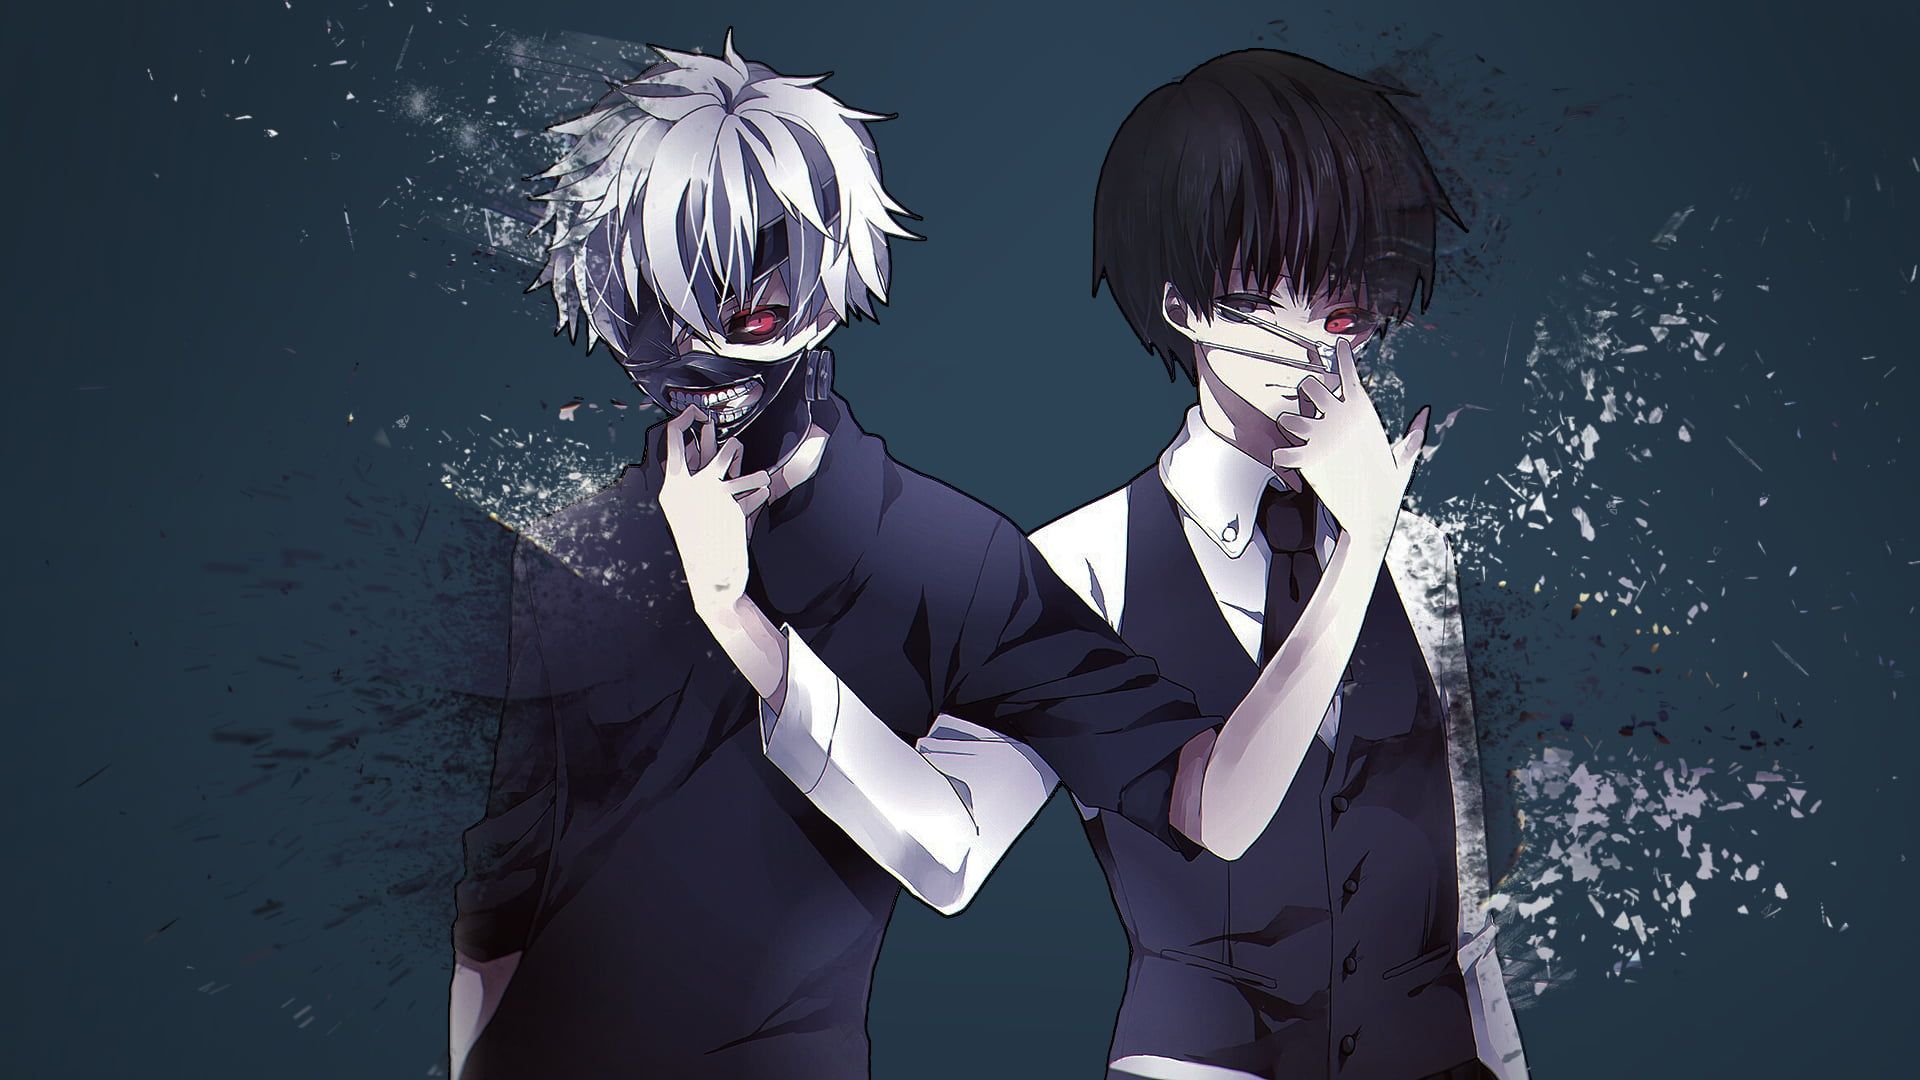 Laptop Anime Tokyo Ghoul Wallpapers - Wallpaper Cave